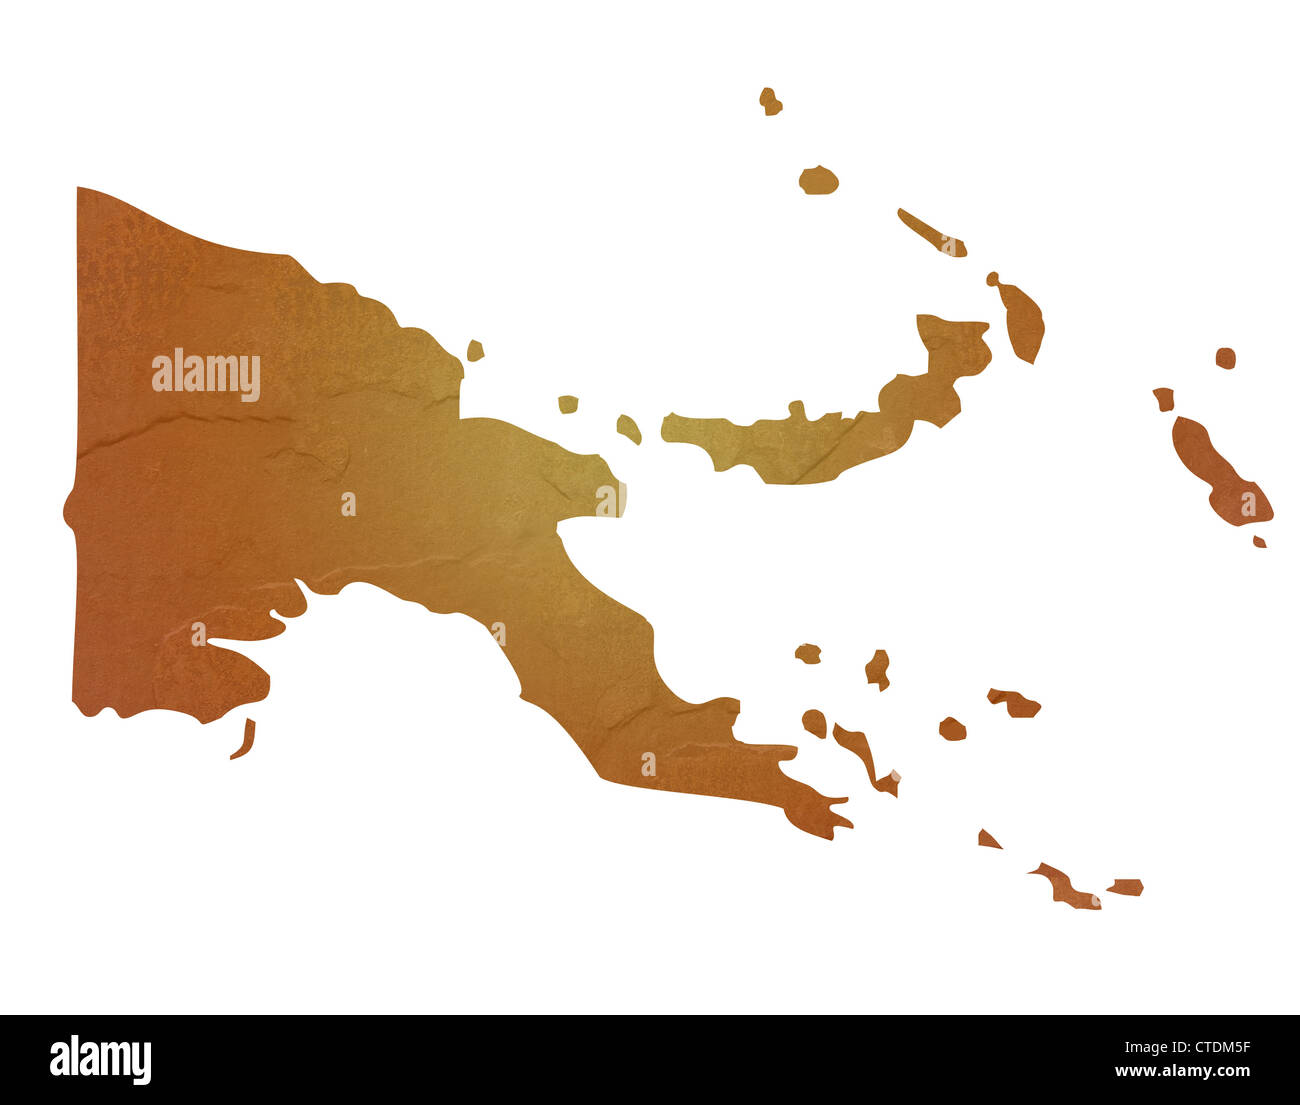 Papa New Guinea map with brown rock or stone texture, isolated on white background with clipping path. Stock Photo